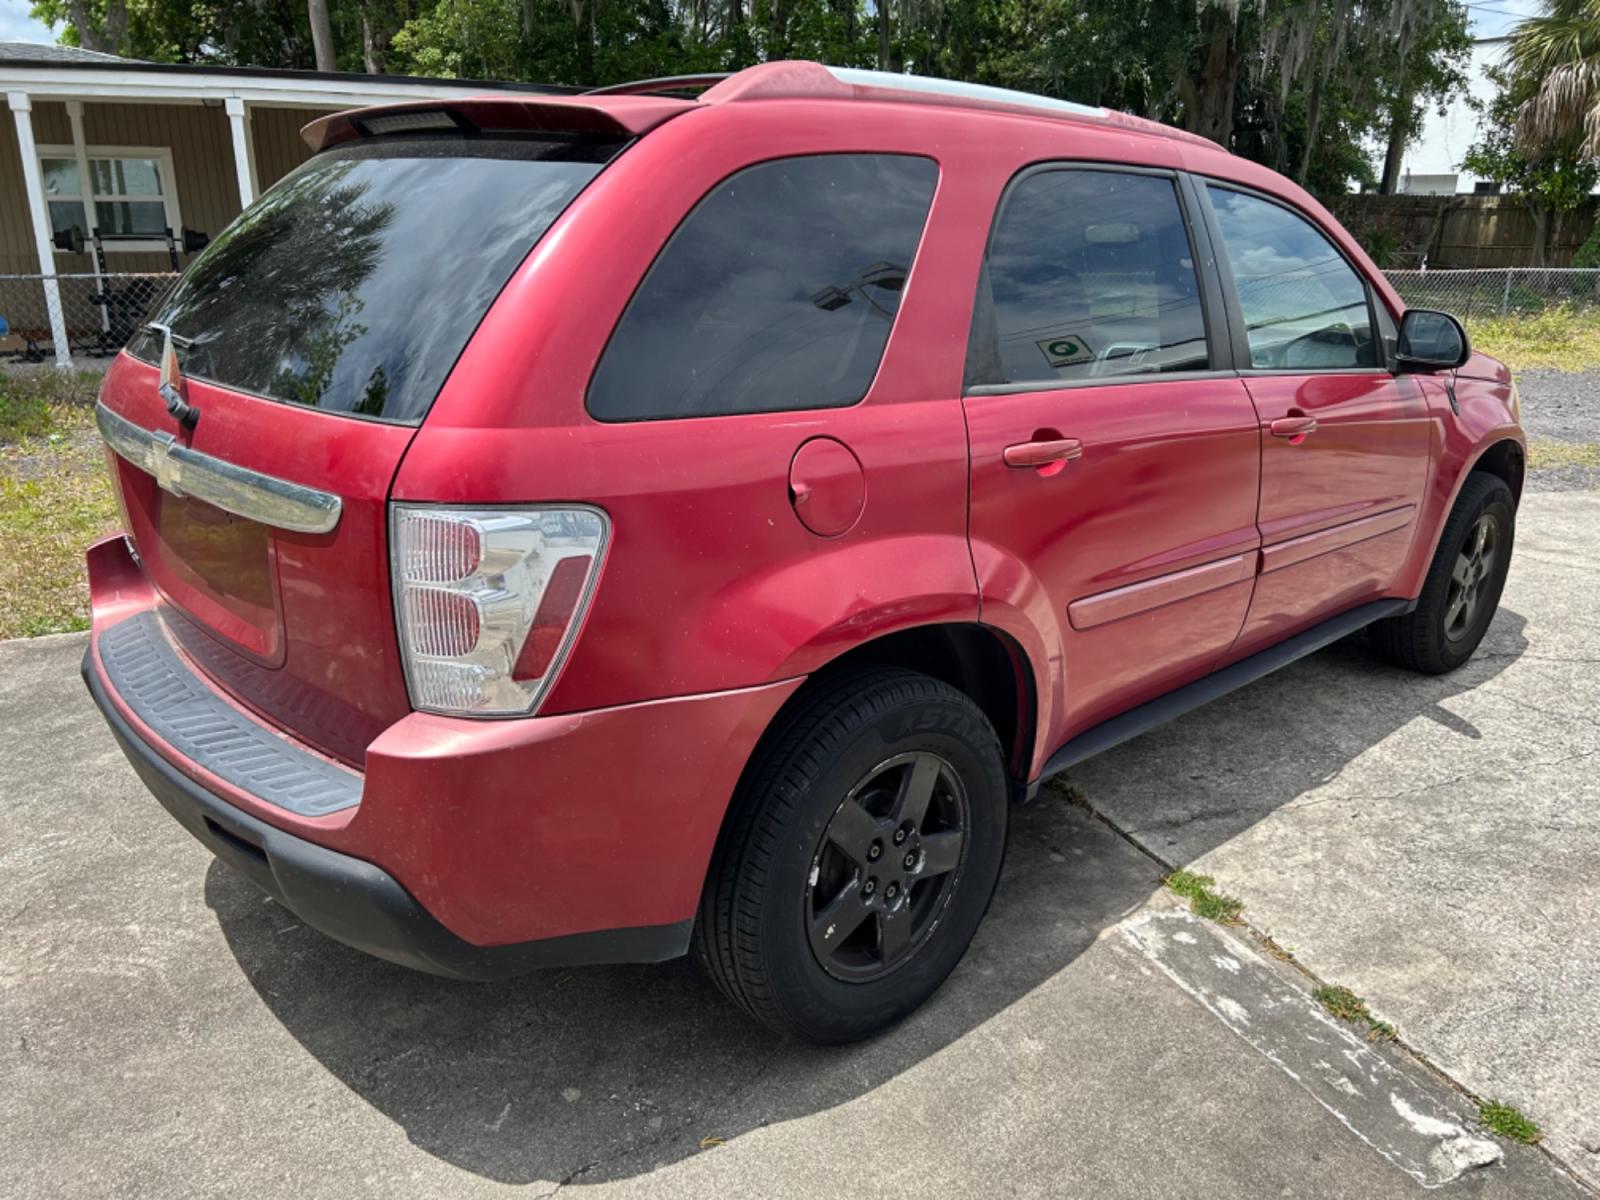 2005 Chevrolet Equinox (2CNDL63F156) , located at 1758 Cassat Ave., Jacksonville, FL, 32210, (904) 384-2799, 30.286720, -81.730652 - LOW MILEAGE!!!!! ONLY 86,523 MILES!!!!! 2005 CHEVROLET EQUINOX LT MODEL LEATHER 4-DOOR AUTOMATIC TRANSMSSION ICE COLD AIR CONDITIONING RUNS GREAT $3900.00 DON'T HESITATE OR THIS ONE WILL BE GONE CALL US @ 904-384-2799 - Photo #3